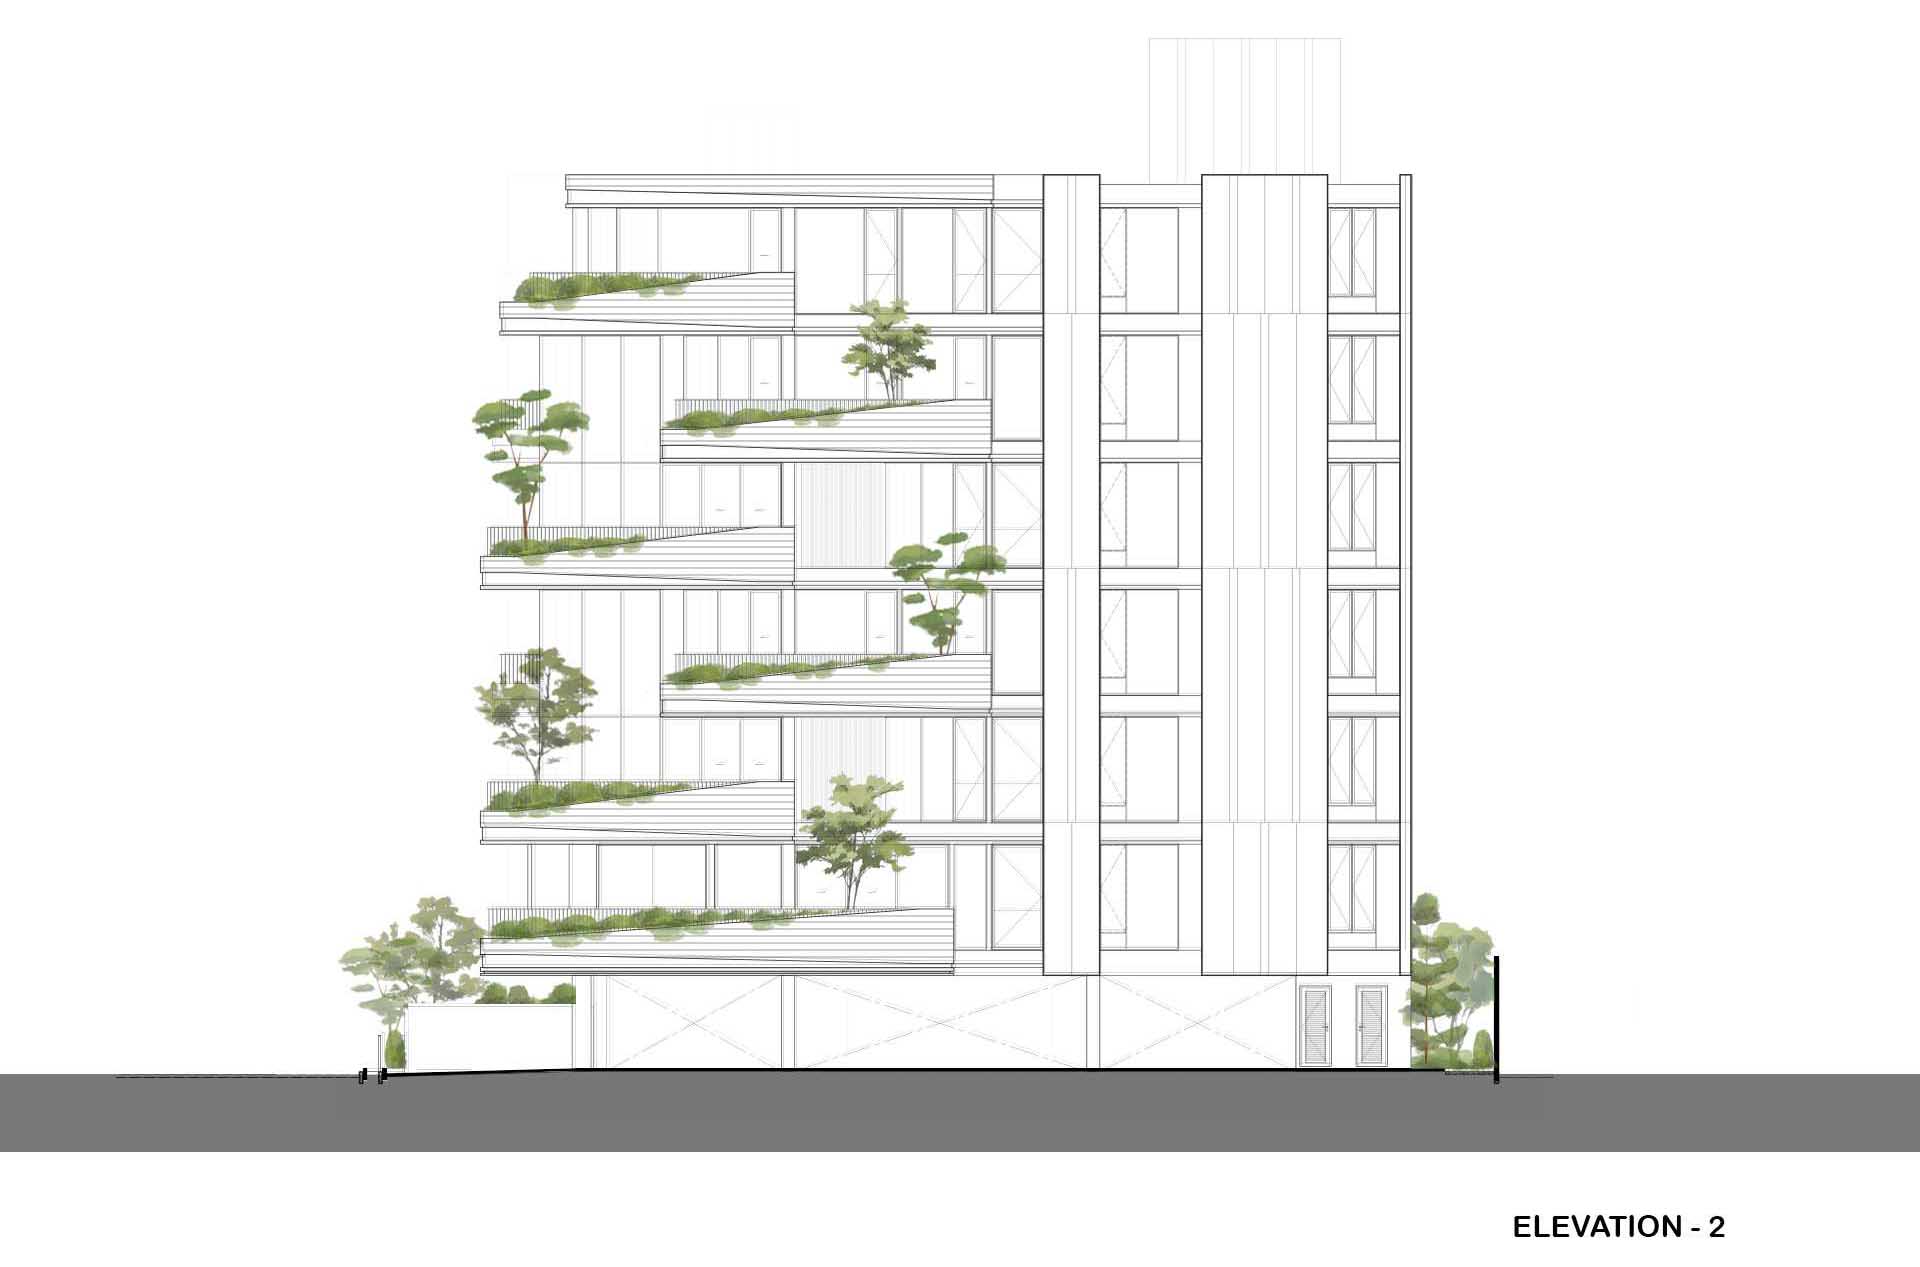 The elevation diagram of a modern condo building.